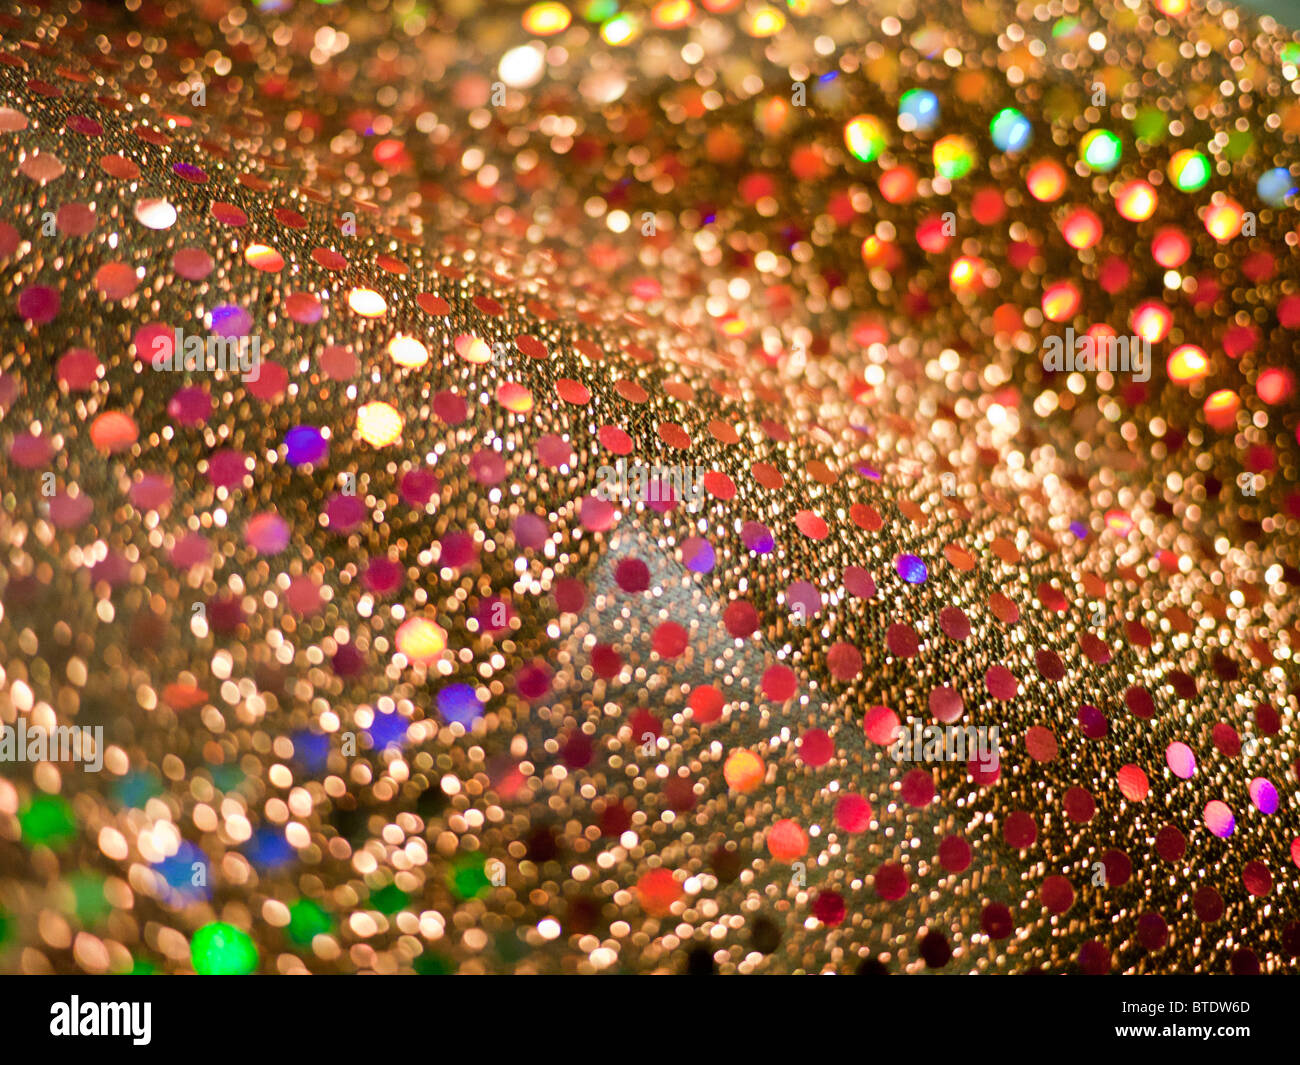 Close Up Of Many Shiny Gold Sequins Stock Photo, Picture and Royalty Free  Image. Image 19047878.